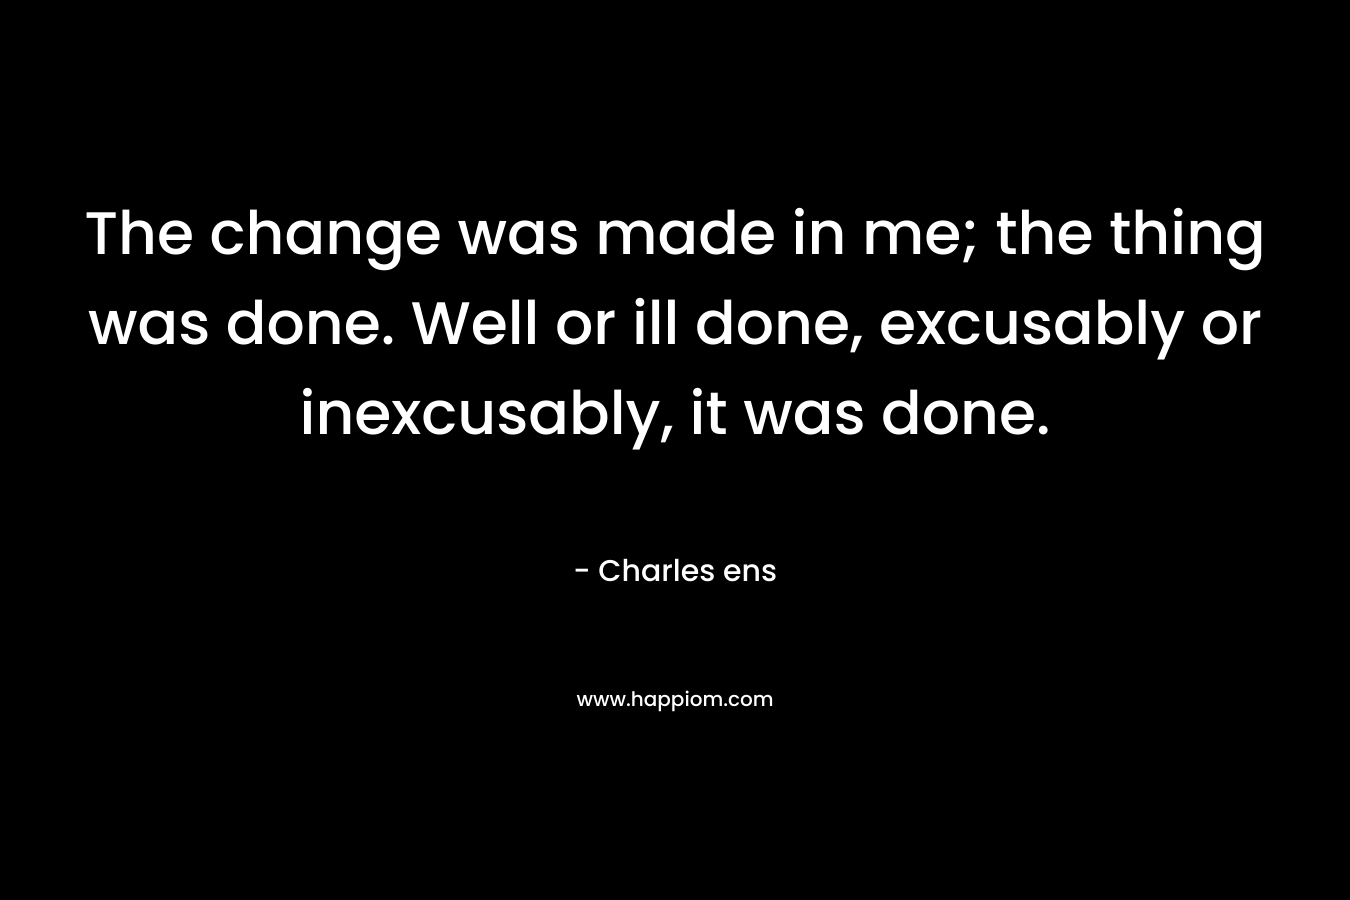 The change was made in me; the thing was done. Well or ill done, excusably or inexcusably, it was done.